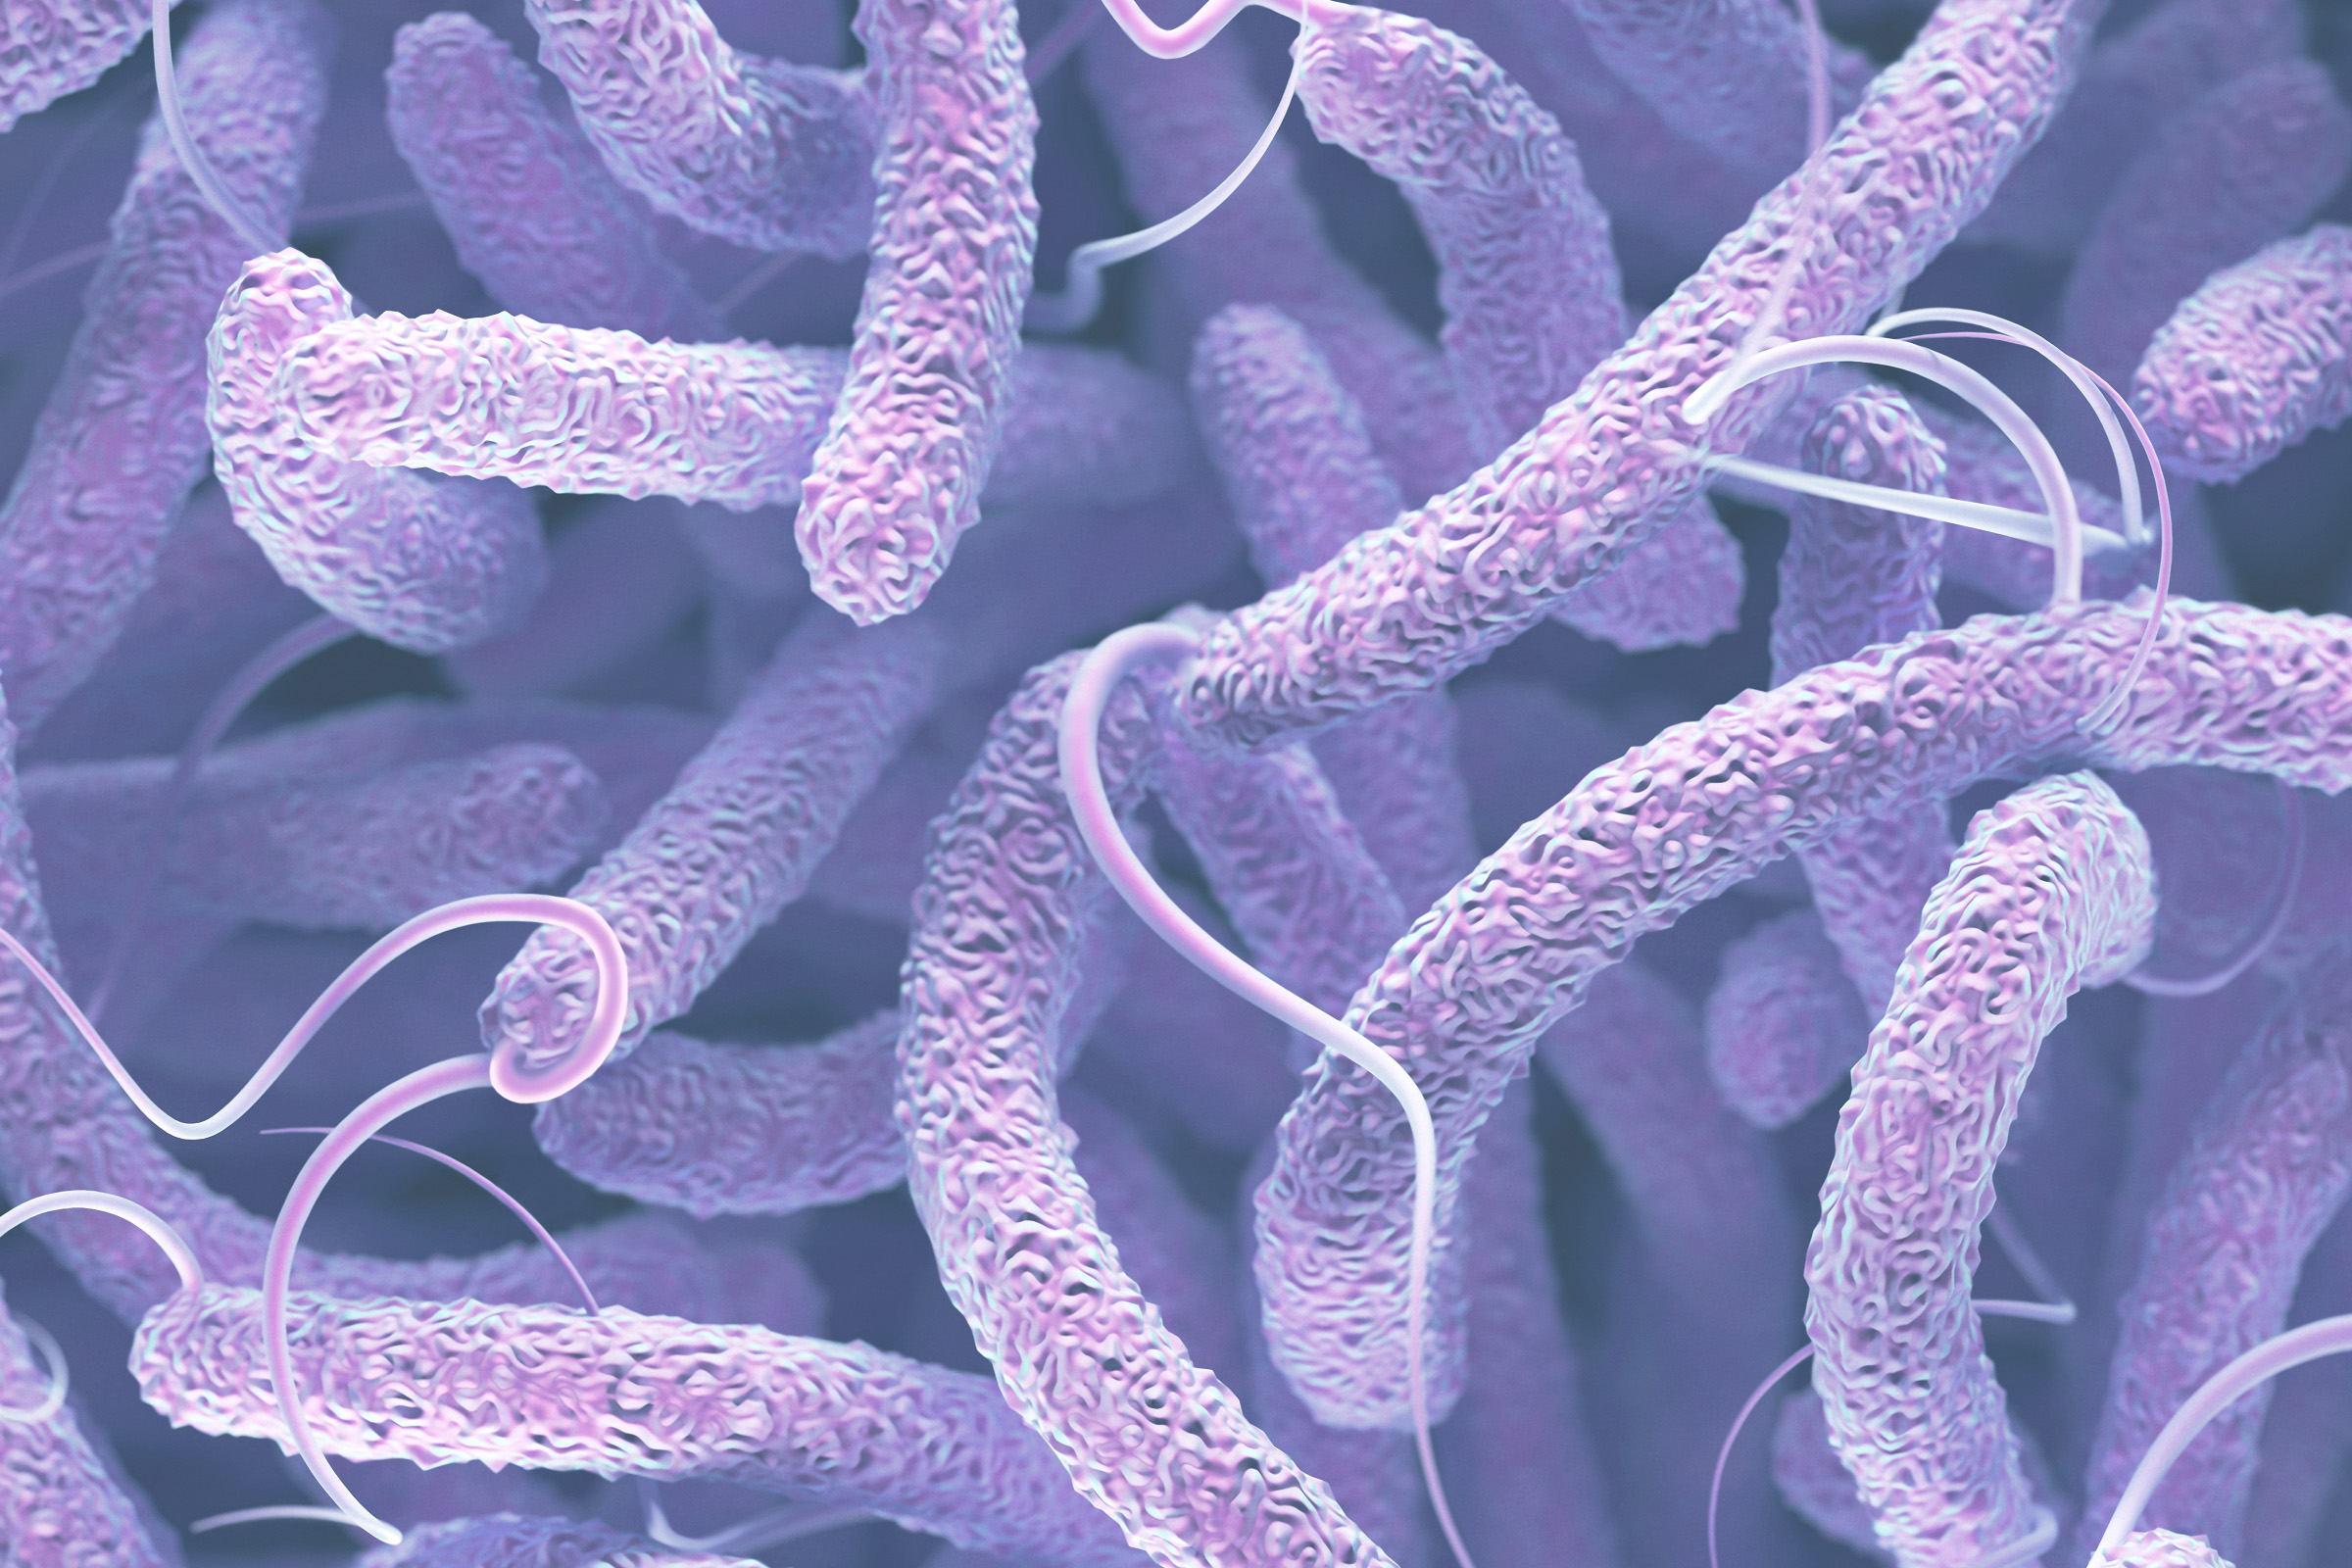 Image of cholera bacteria stained purple